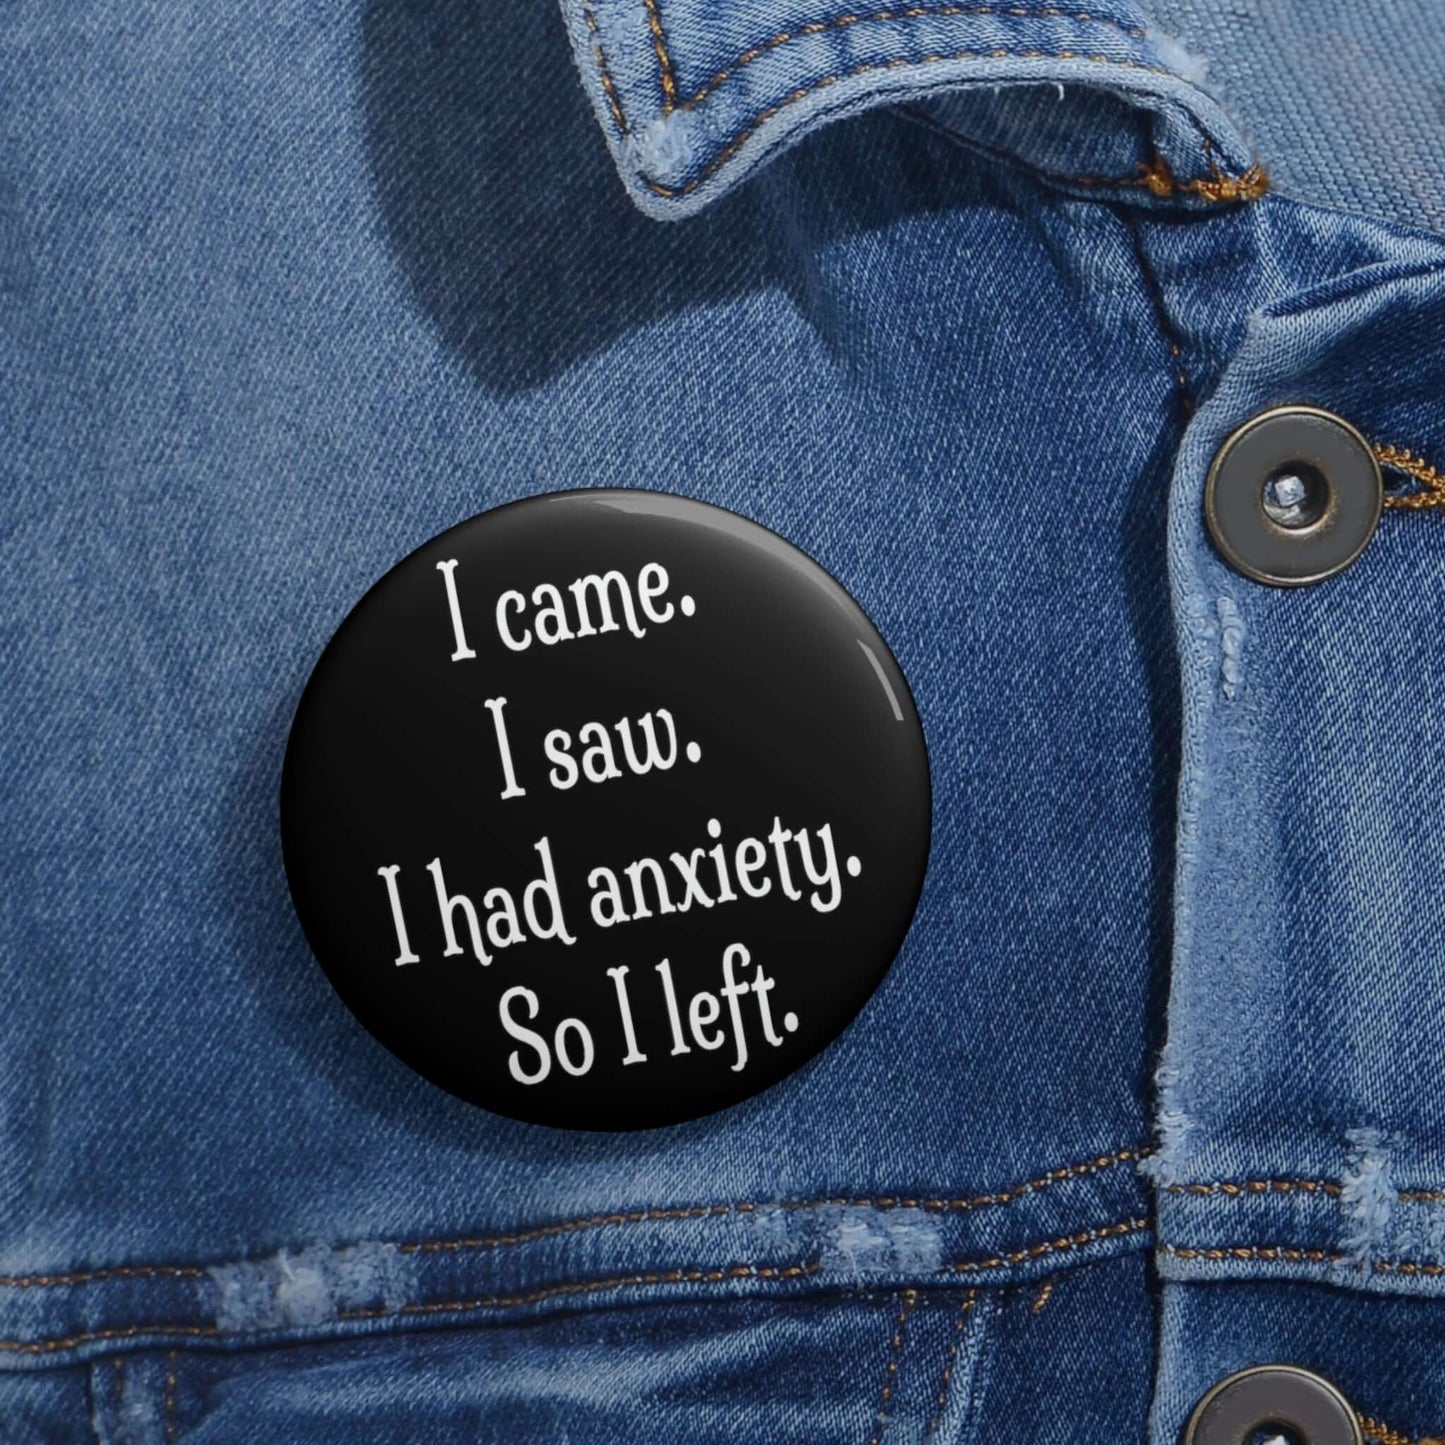 Social anxiety funny pinback button